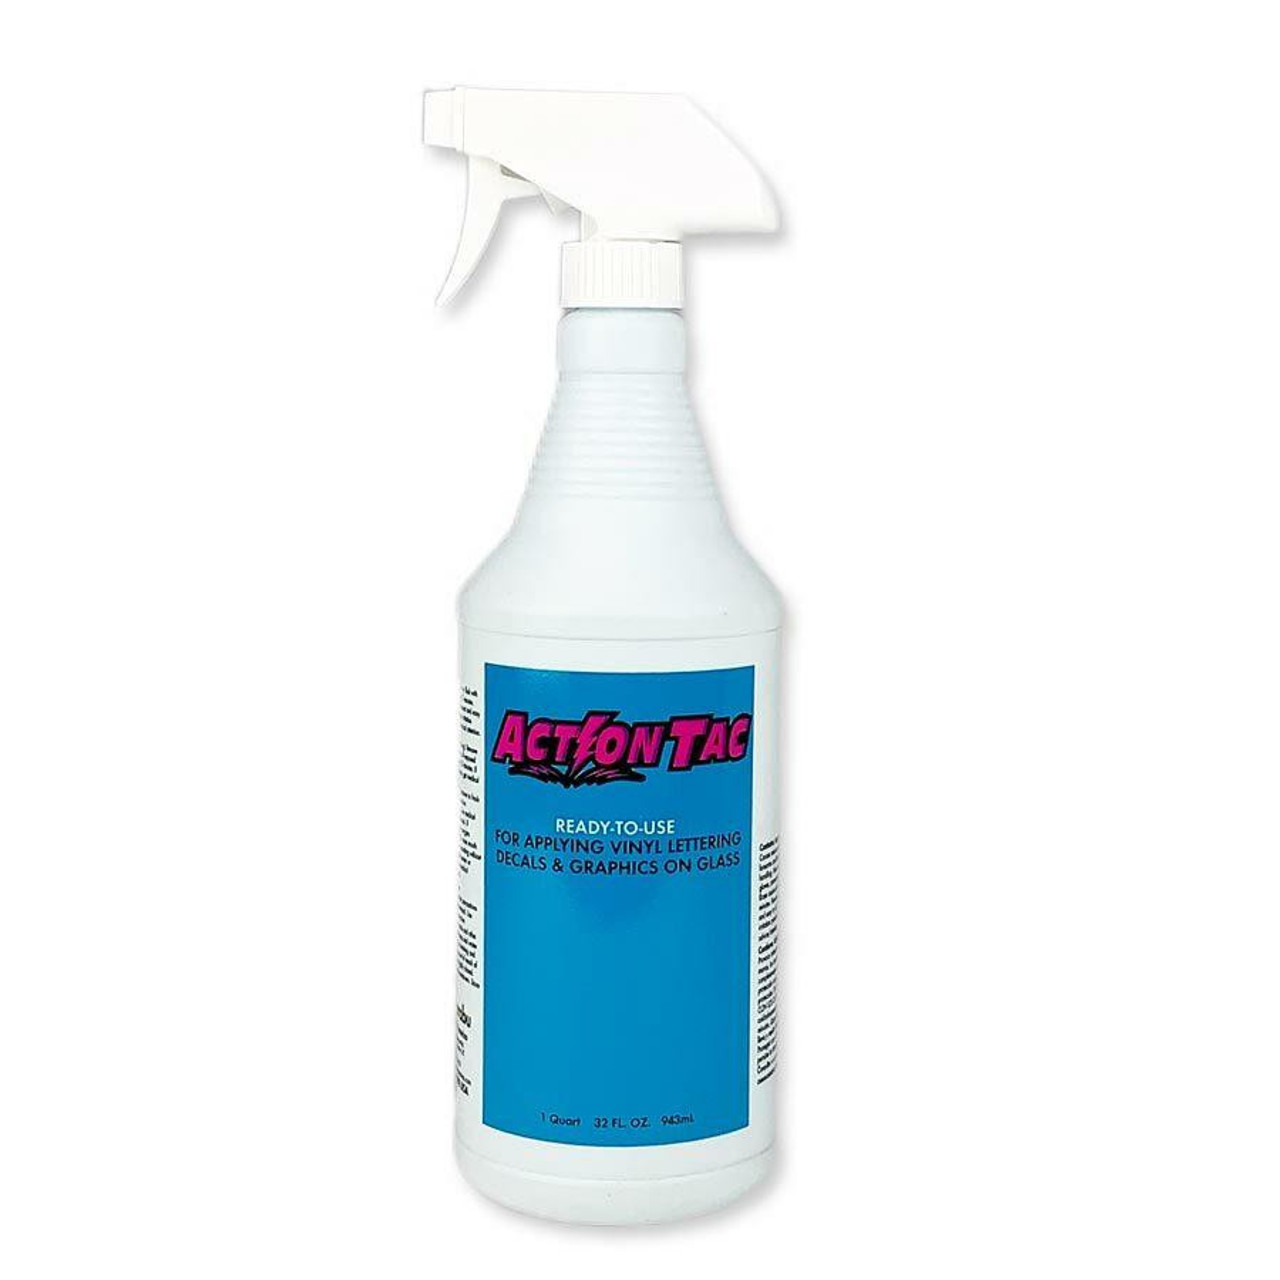 Rapid Remover - Adhesive Remover by Rapid Tac - 1 Quart with Spray